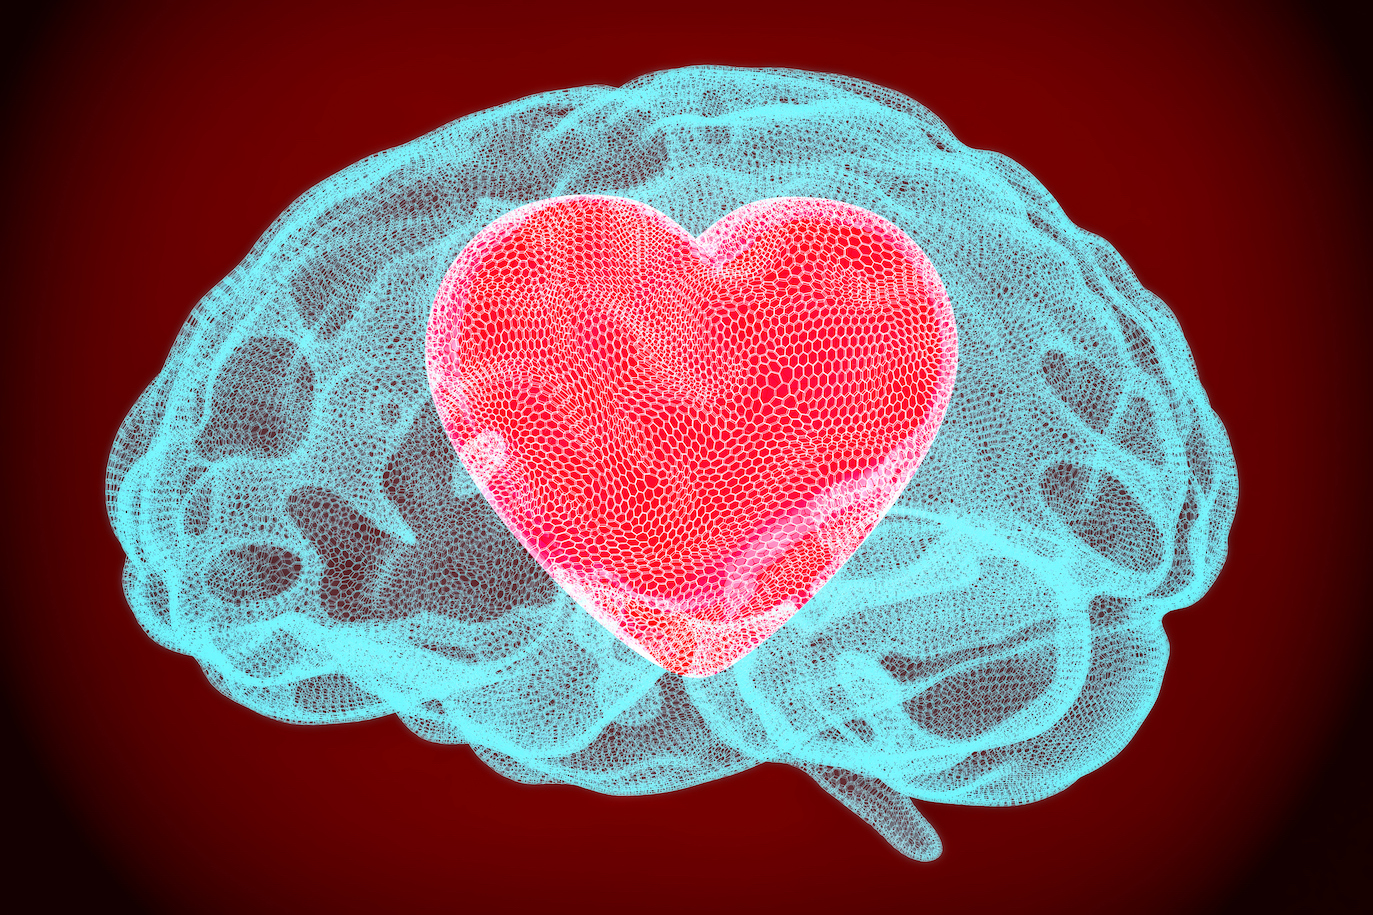 Image of a heart symbol inside an outline of a brain, indicating a sensitive personality type